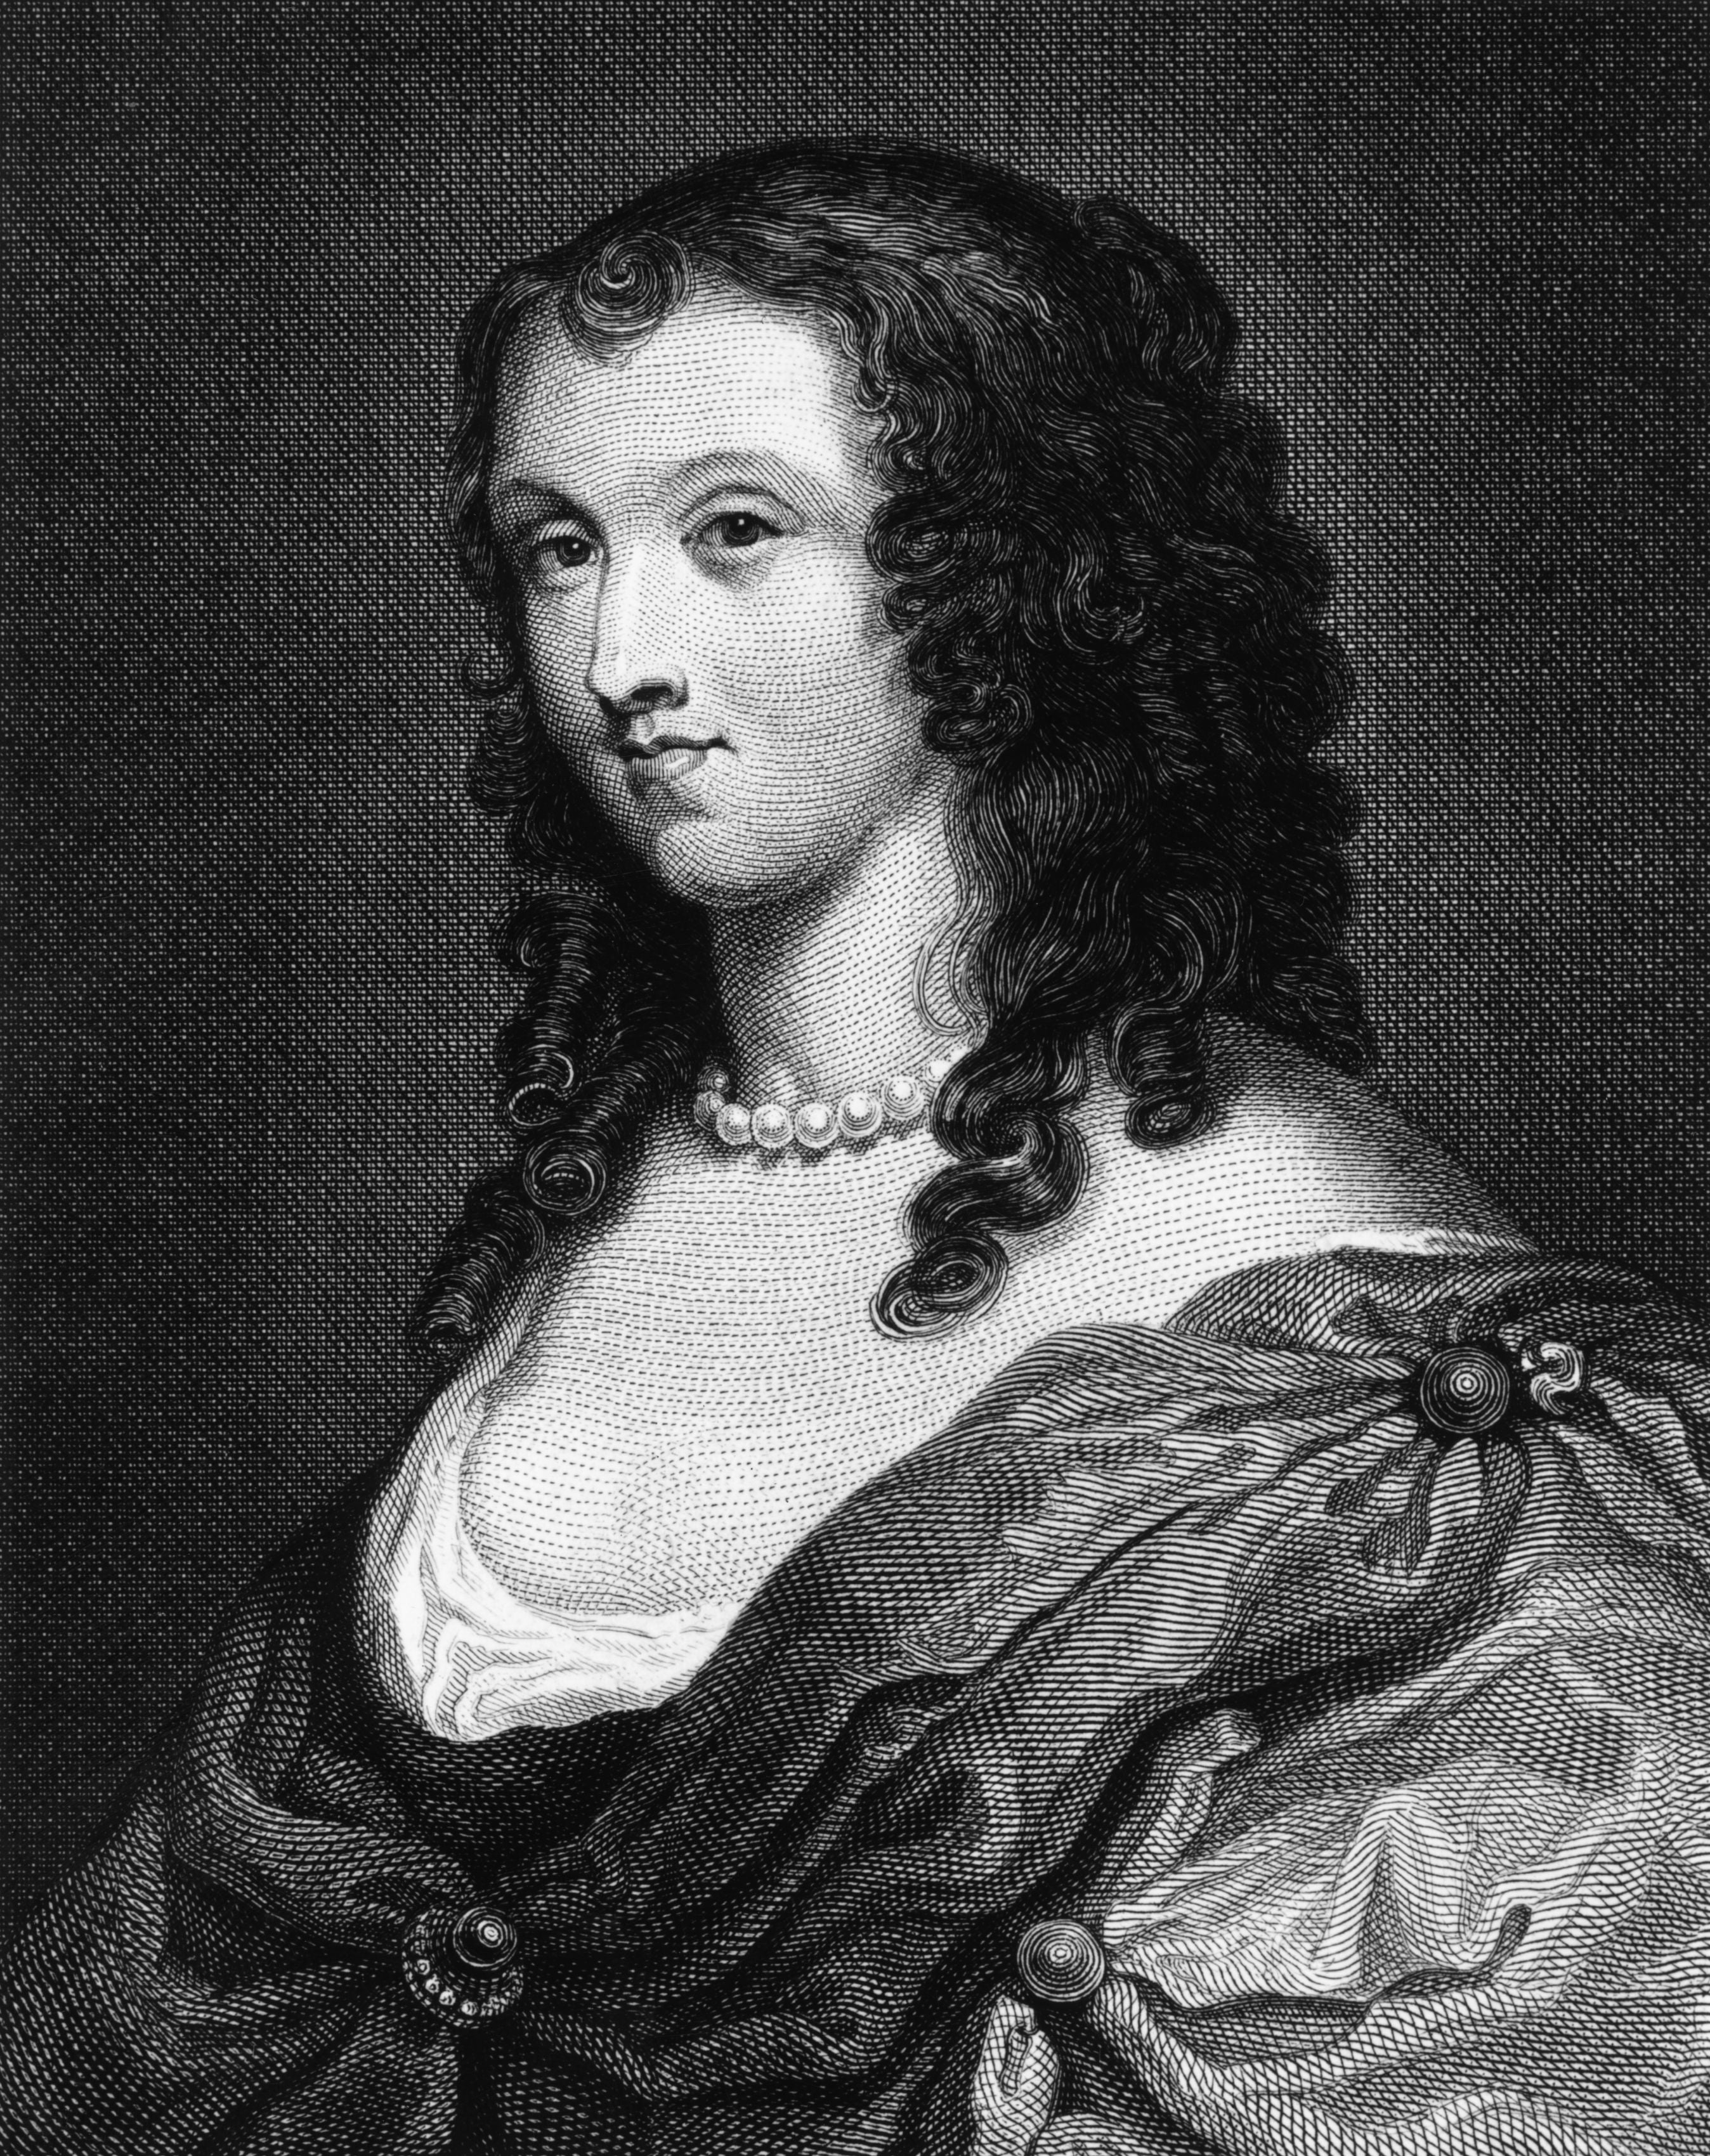 Aphra Behn worked as a spy trafficking political and naval information and later became the first professional female authors in England